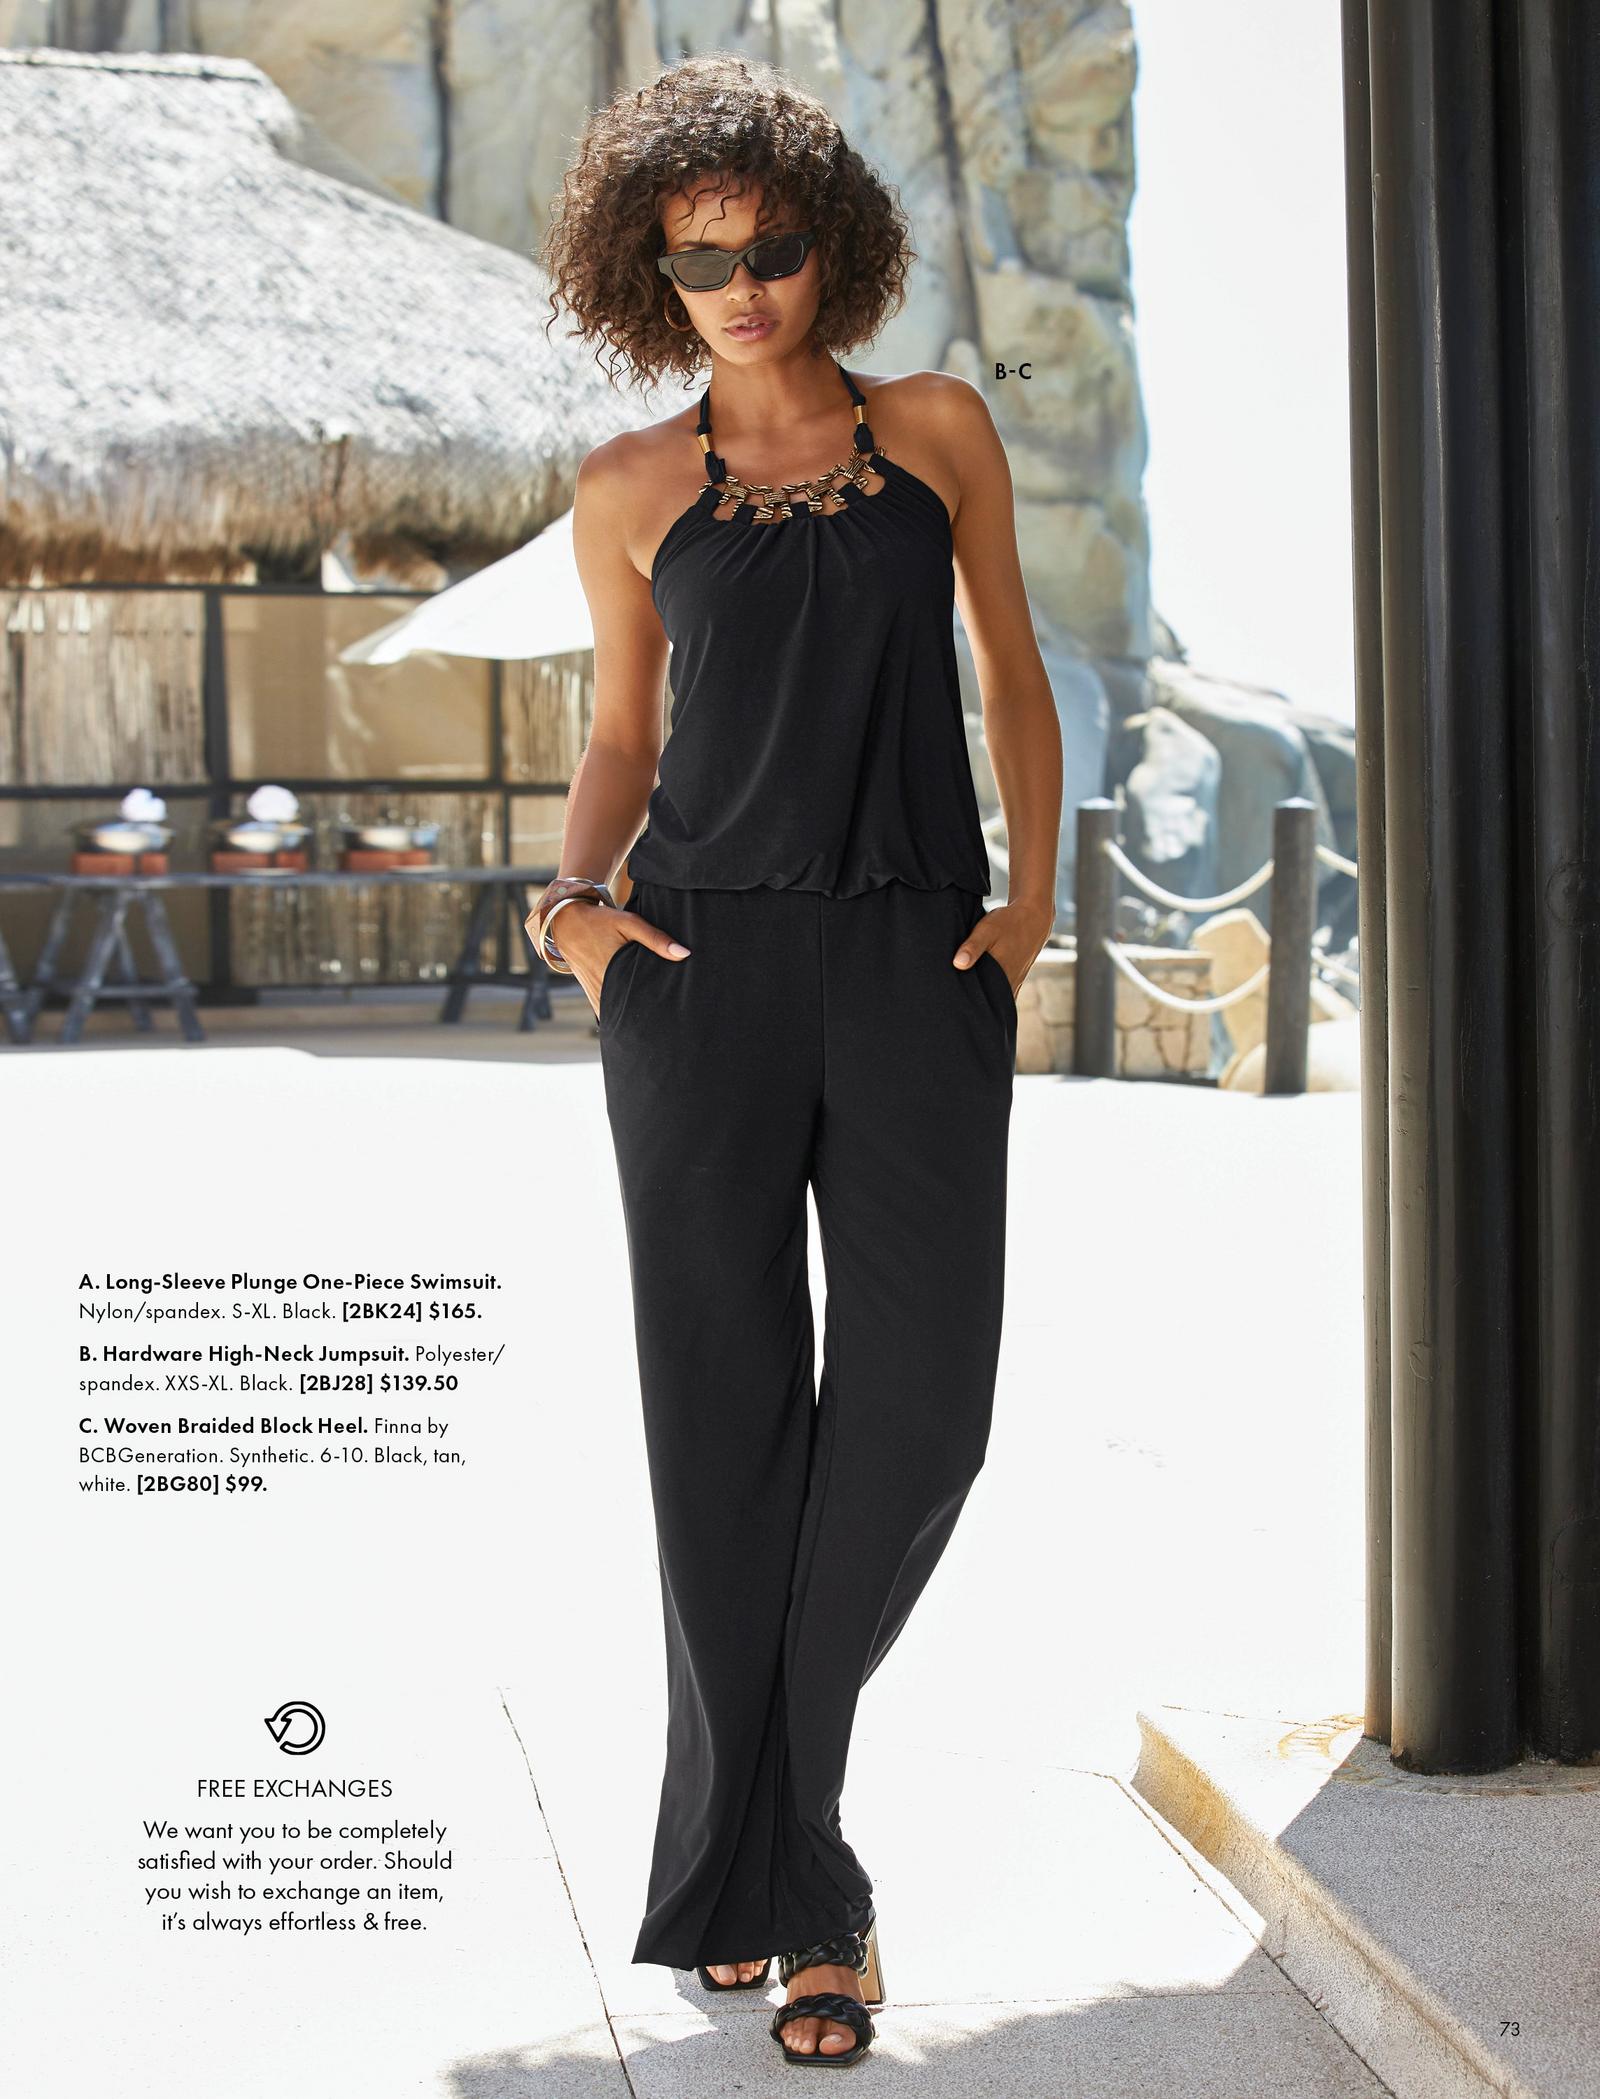 left model wearing a black floral print mock-neck one-piece swimsuit and sunglasses. right model wearing a black hardware embellished sleeveless jumpsuit, sunglasses, and black braided sandals.